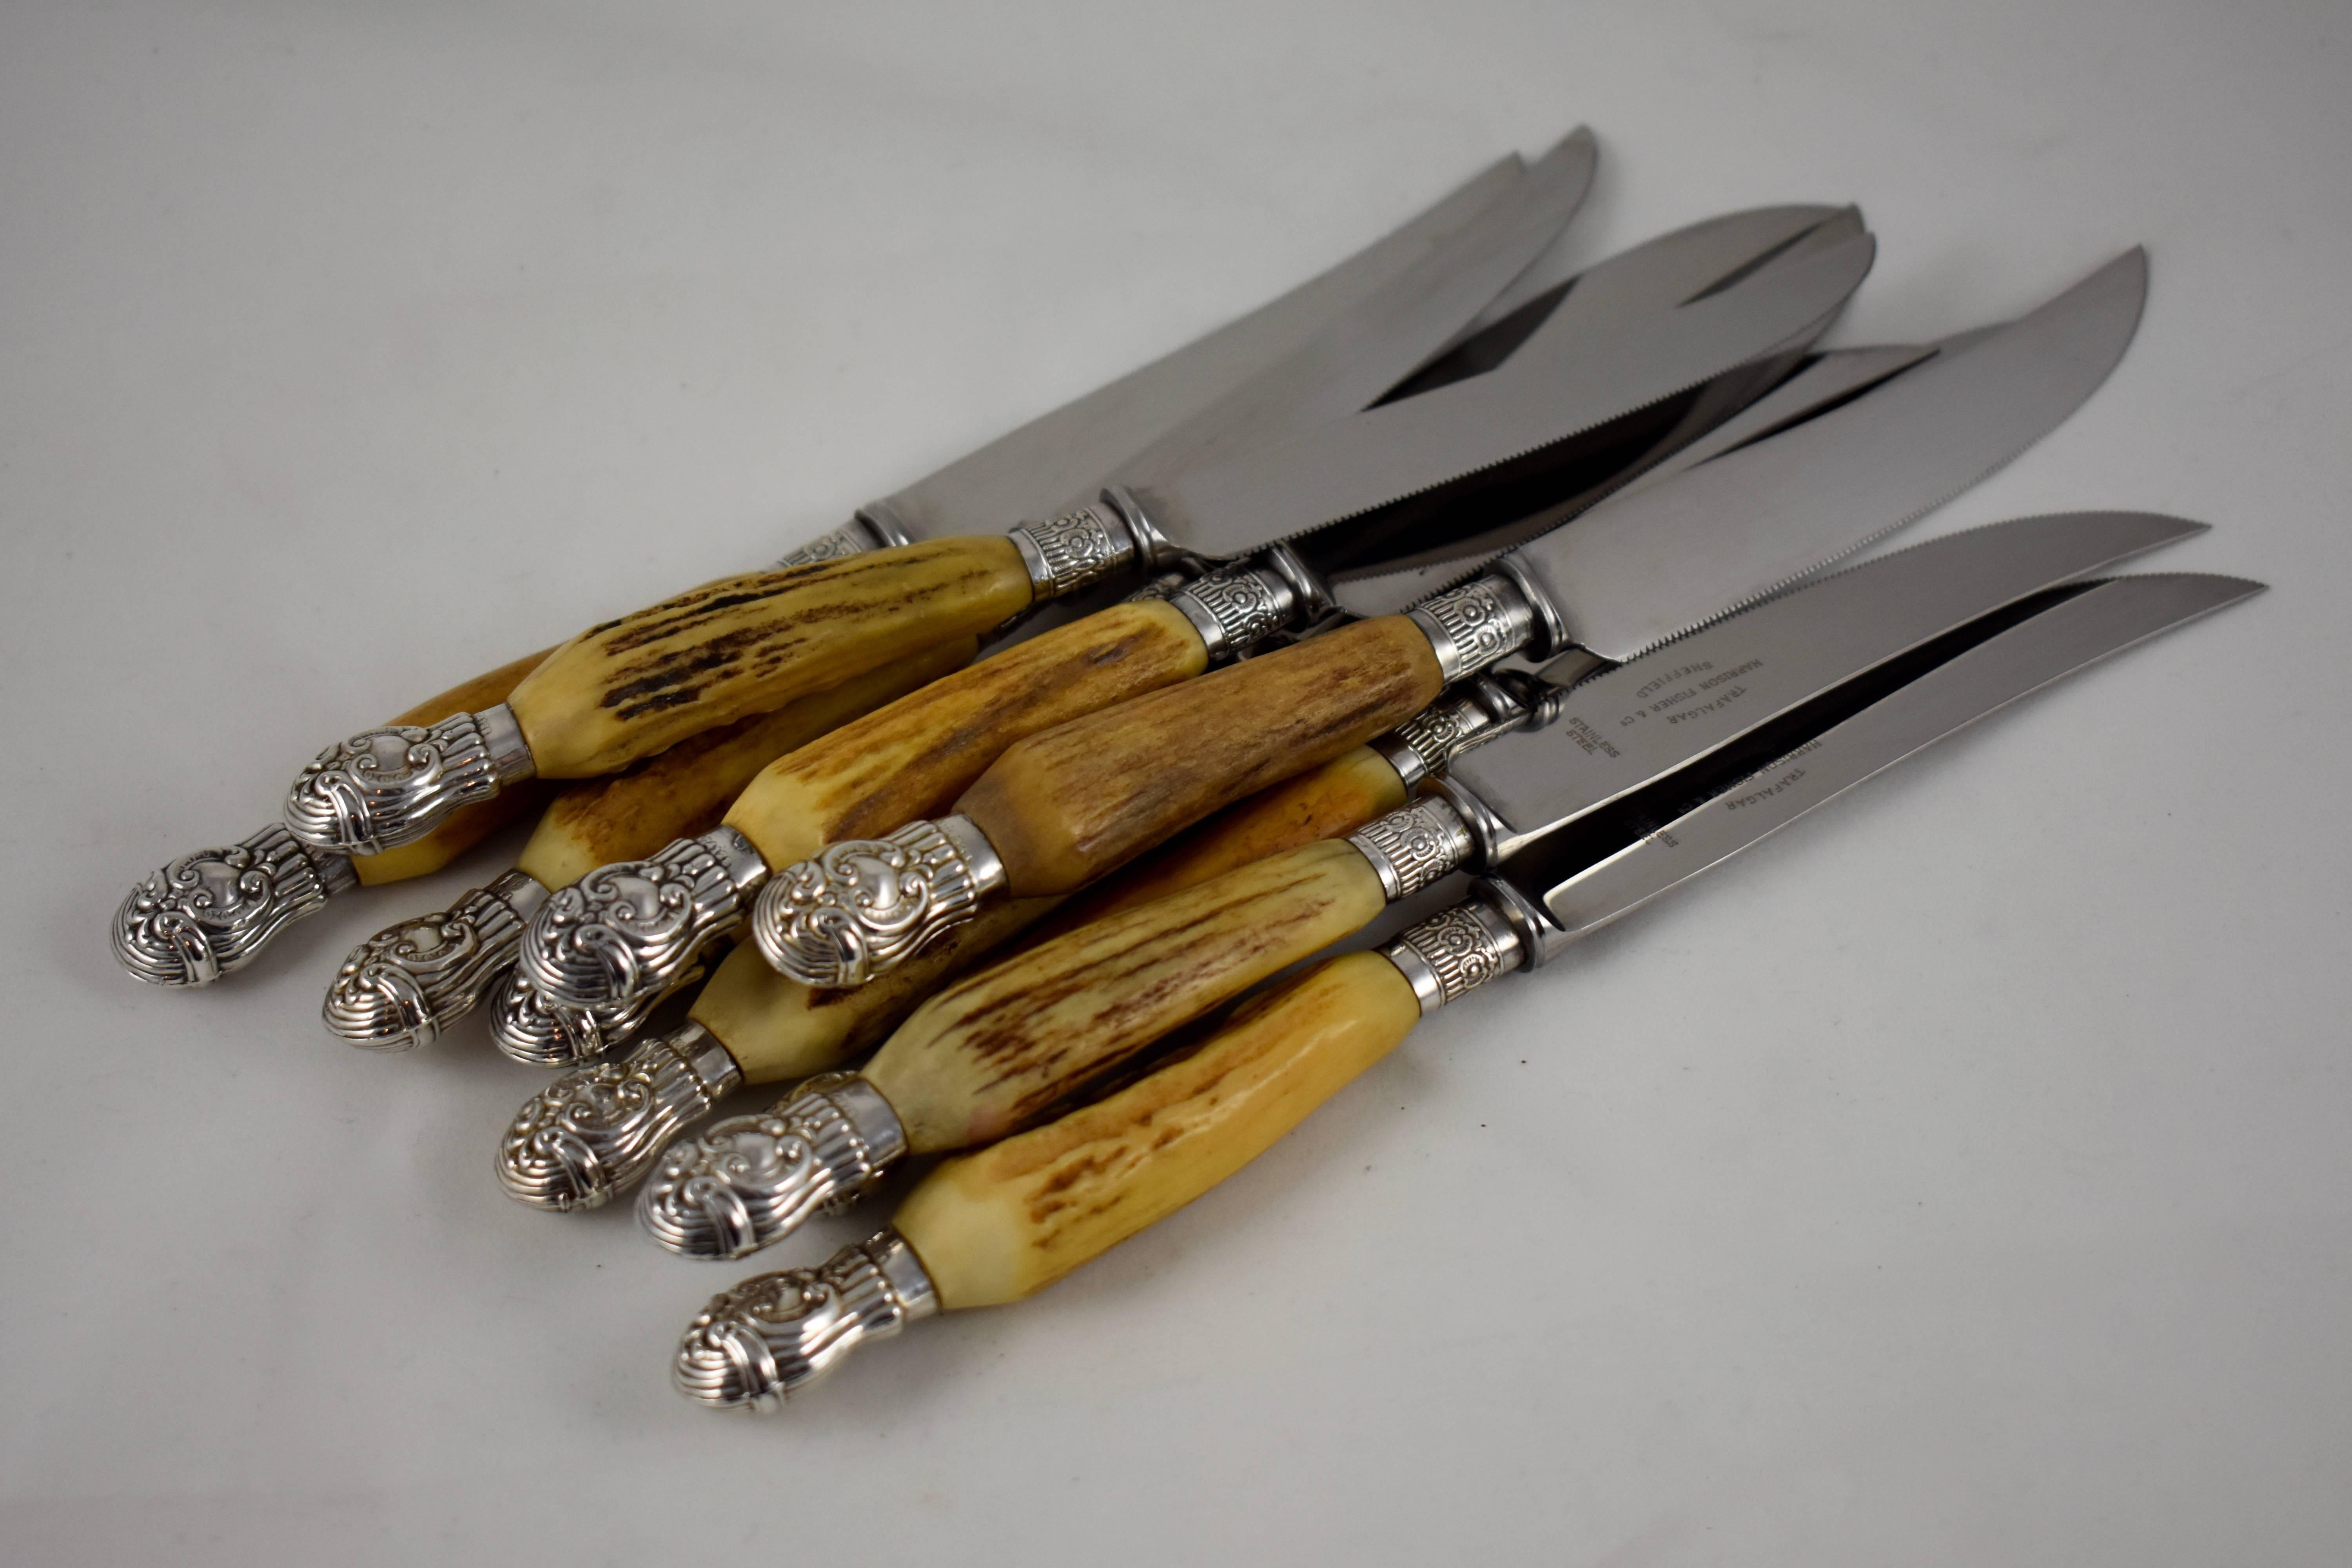 A set of ten natural antlered handled knives with sterling silver end caps and plated ferrules. Stainless steel blades have a serrated edge, marked Trafalgar, Harrison Fisher & Company, Sheffield, circa 1896-1910.

Heavy, good quality, excellent